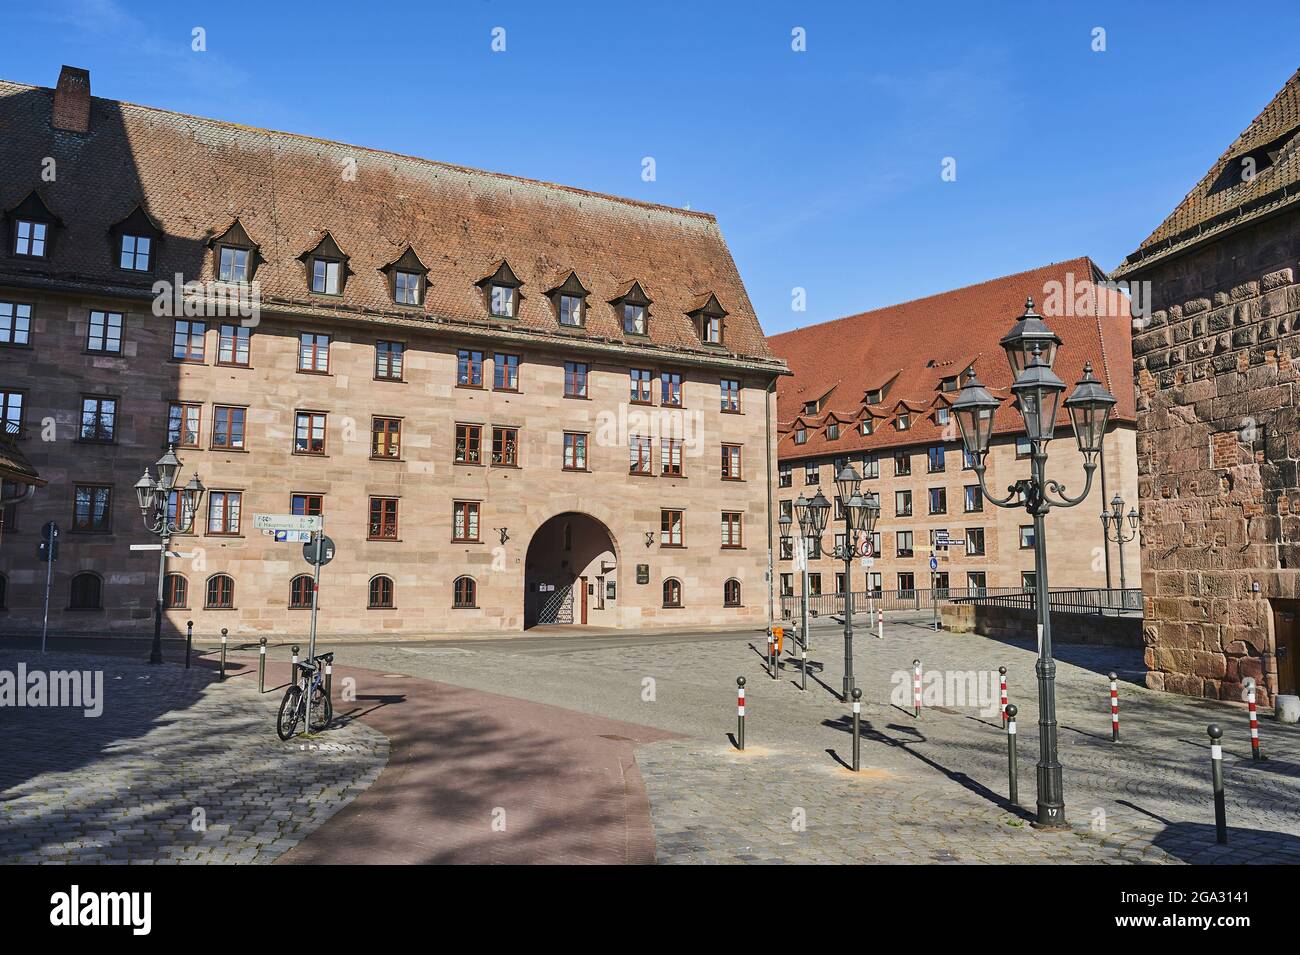 View of the deserted Nuremberg old town in times of the Covid-19 global pandemic; Nuremberg, Franconia, Bavaria, Germany Stock Photo